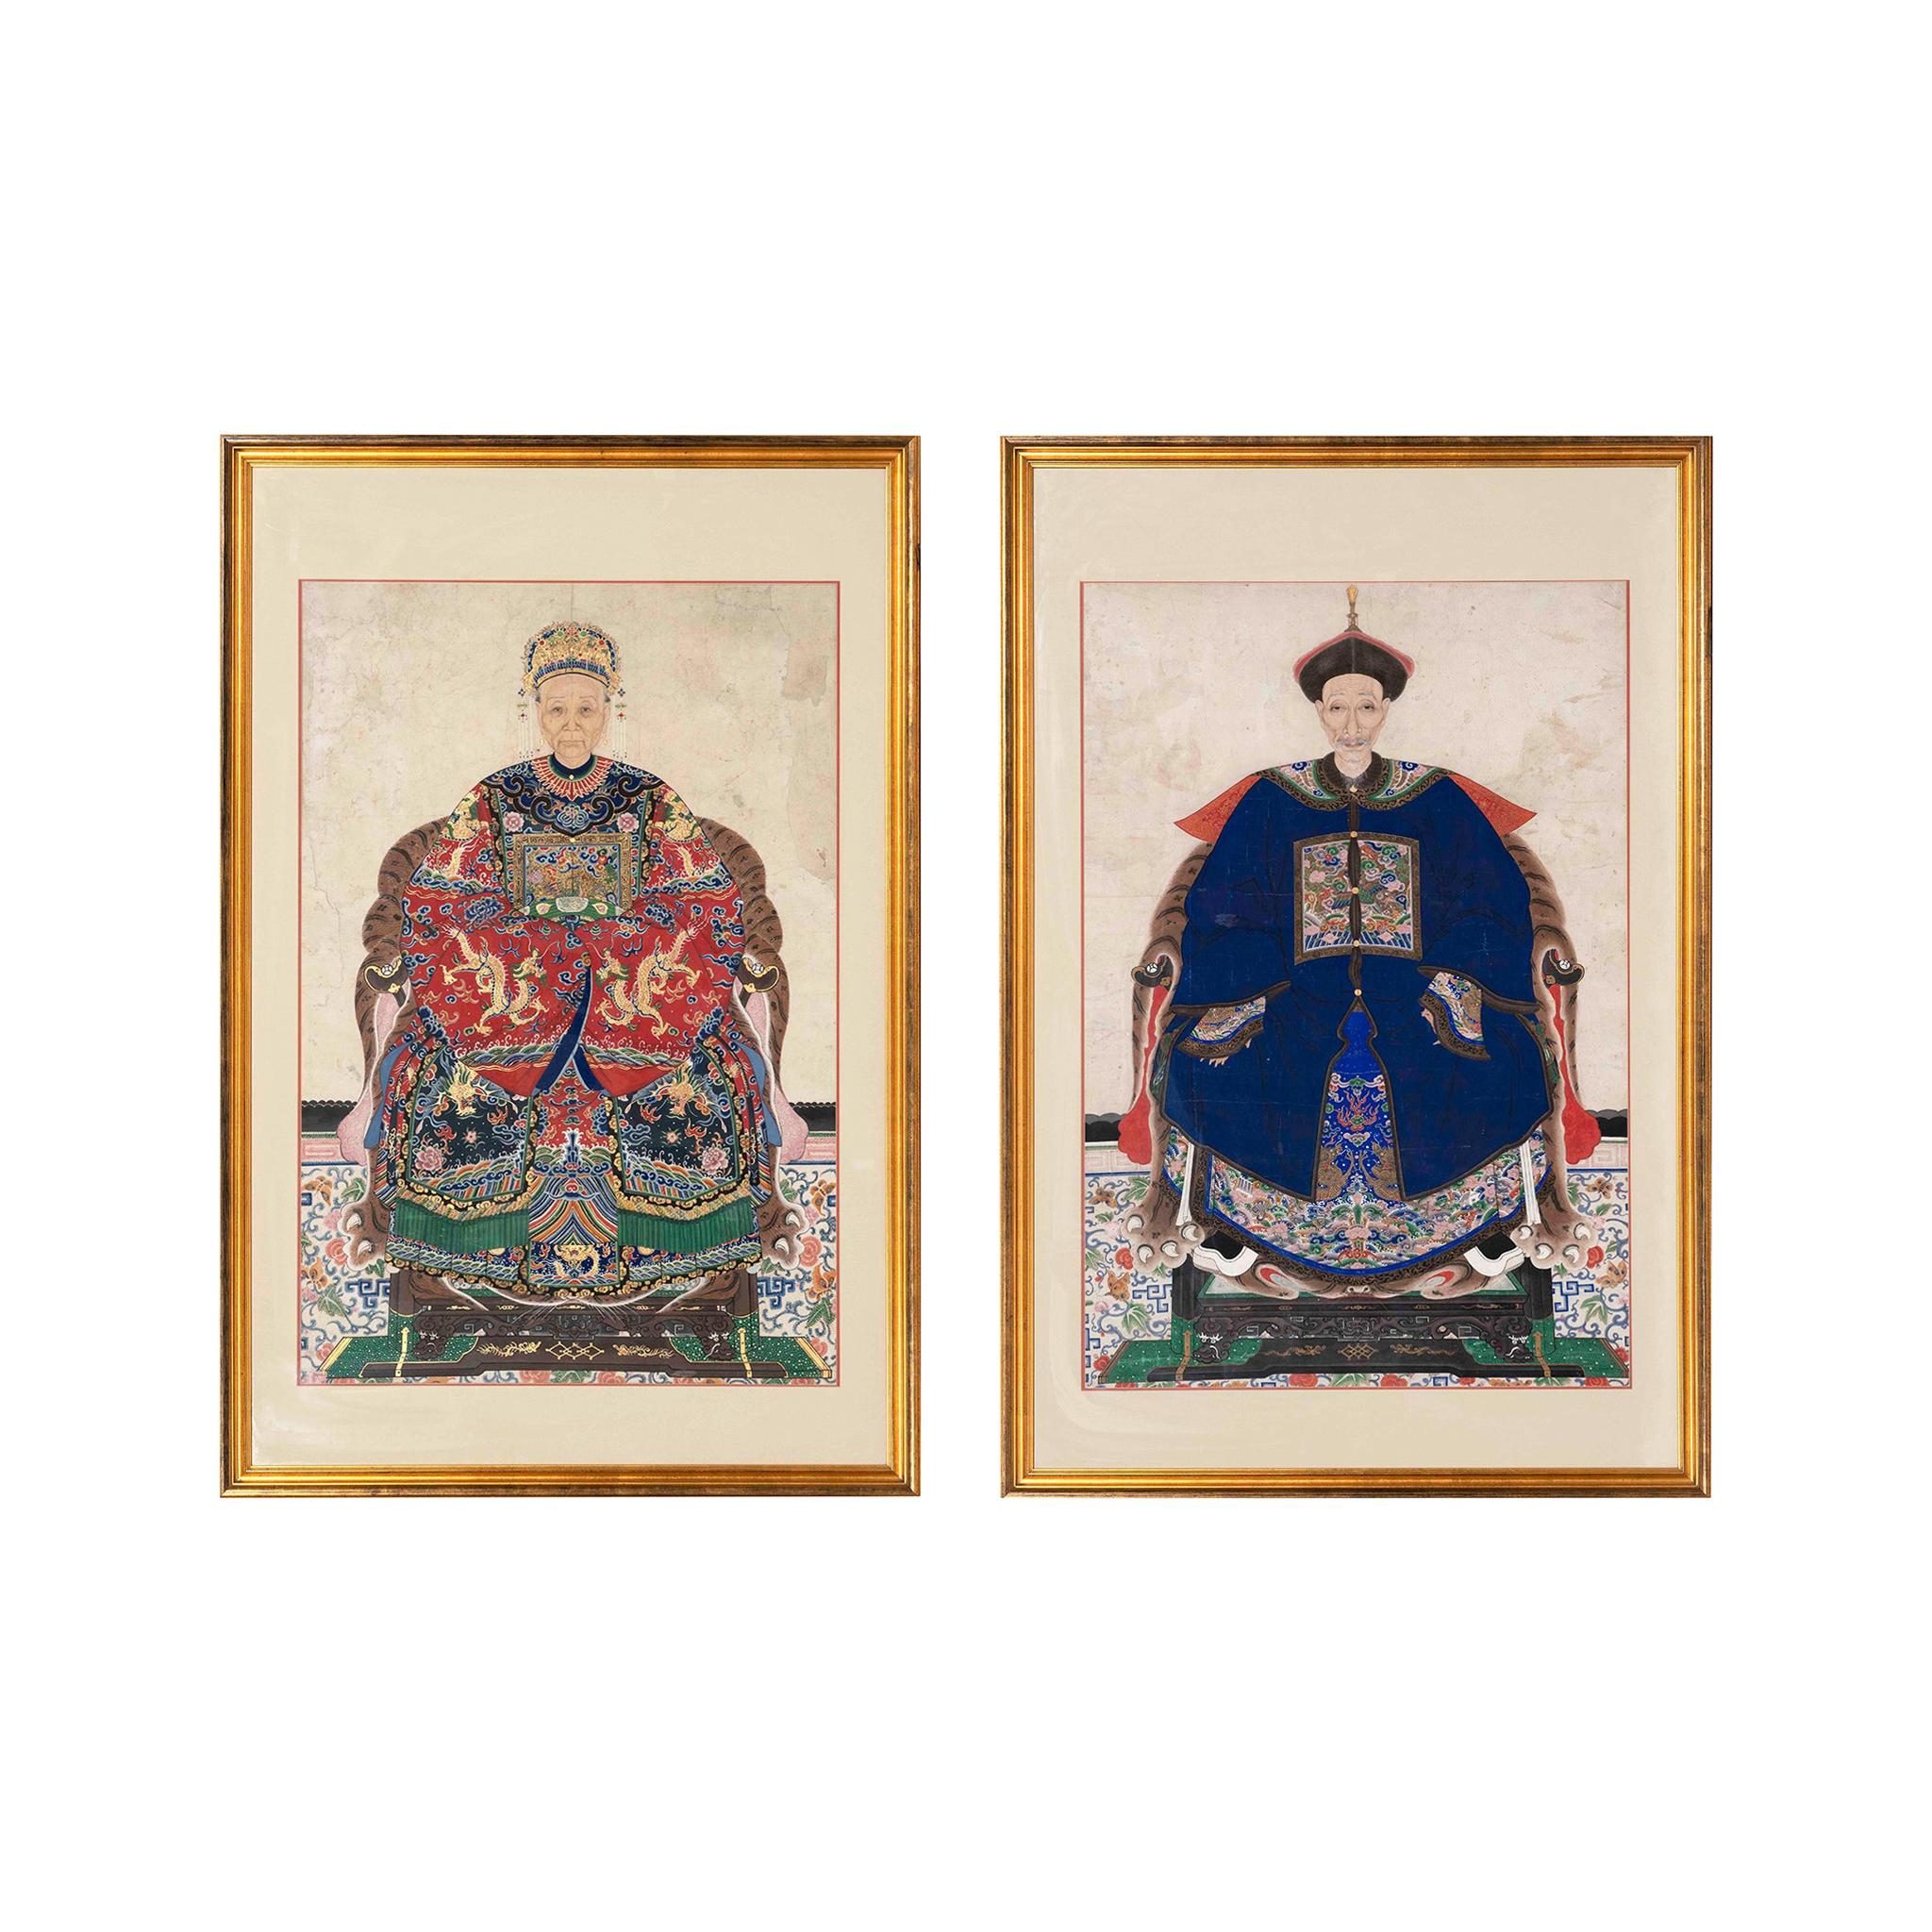 Pair of 19th Century Chinese Ancestral Portraits, Qing Dynasty Era